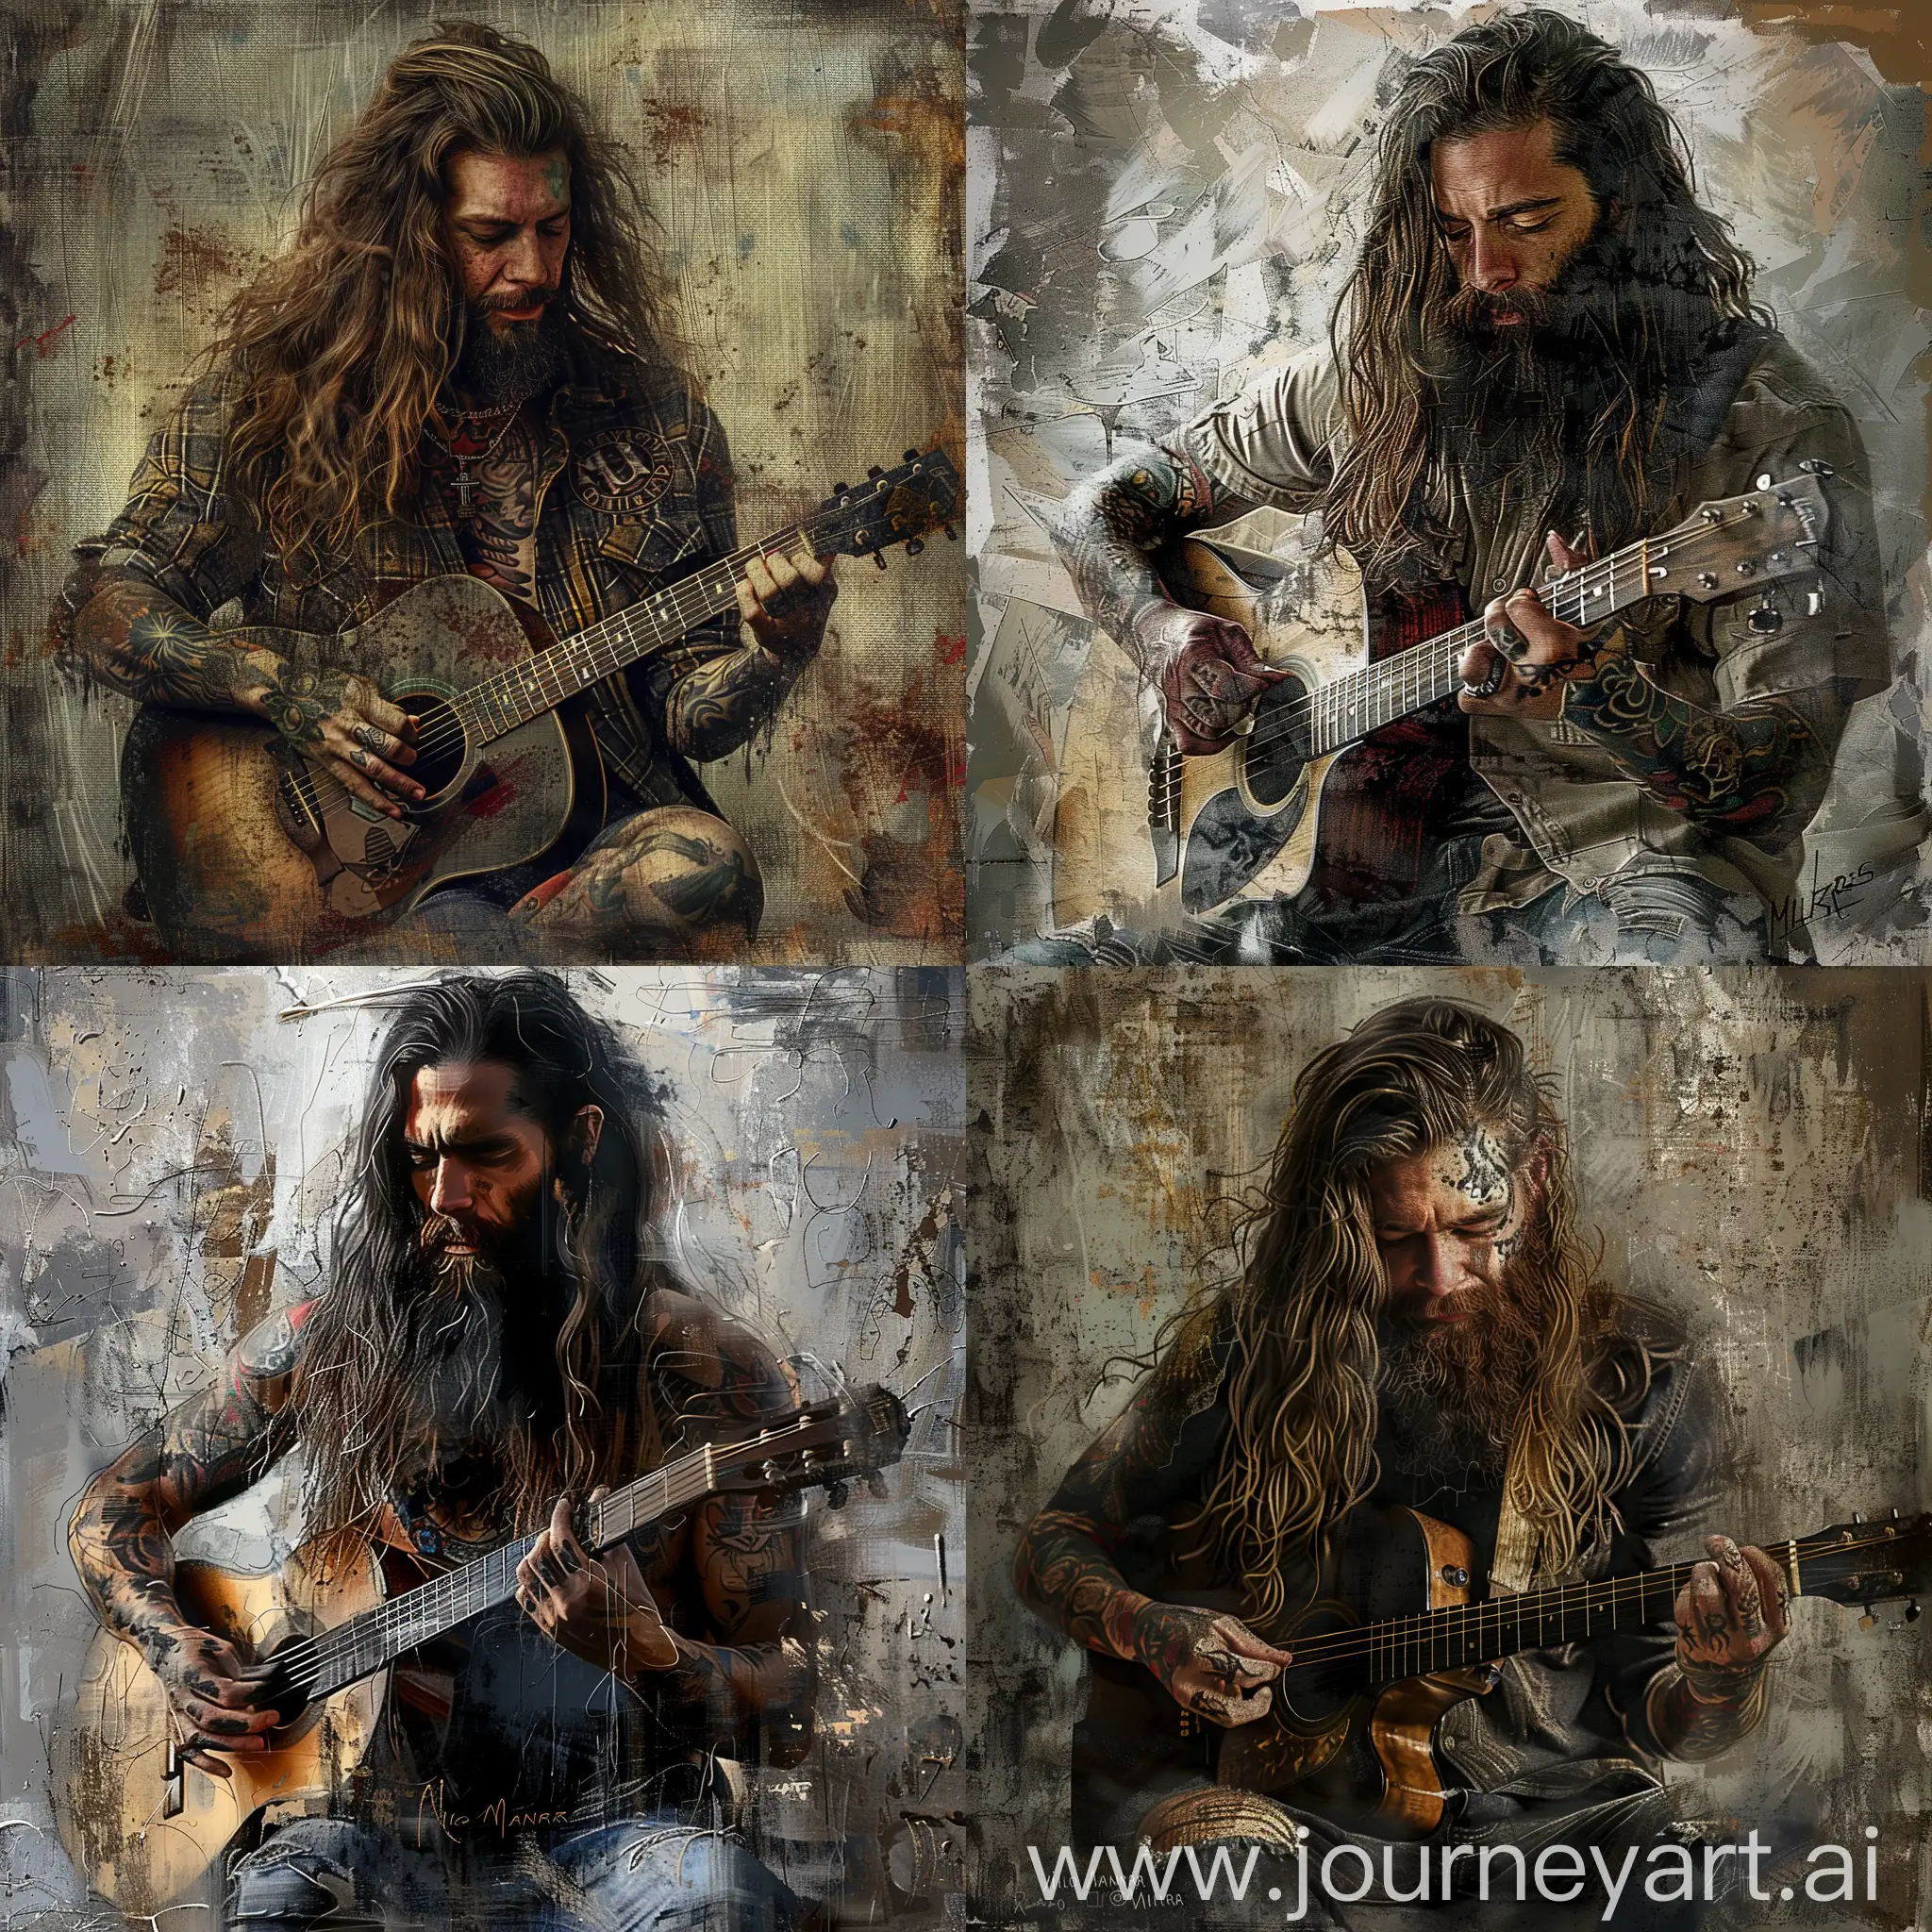 Charismatic-Guitarist-with-Long-Hair-and-Tattoos-in-Modern-Digital-Painting